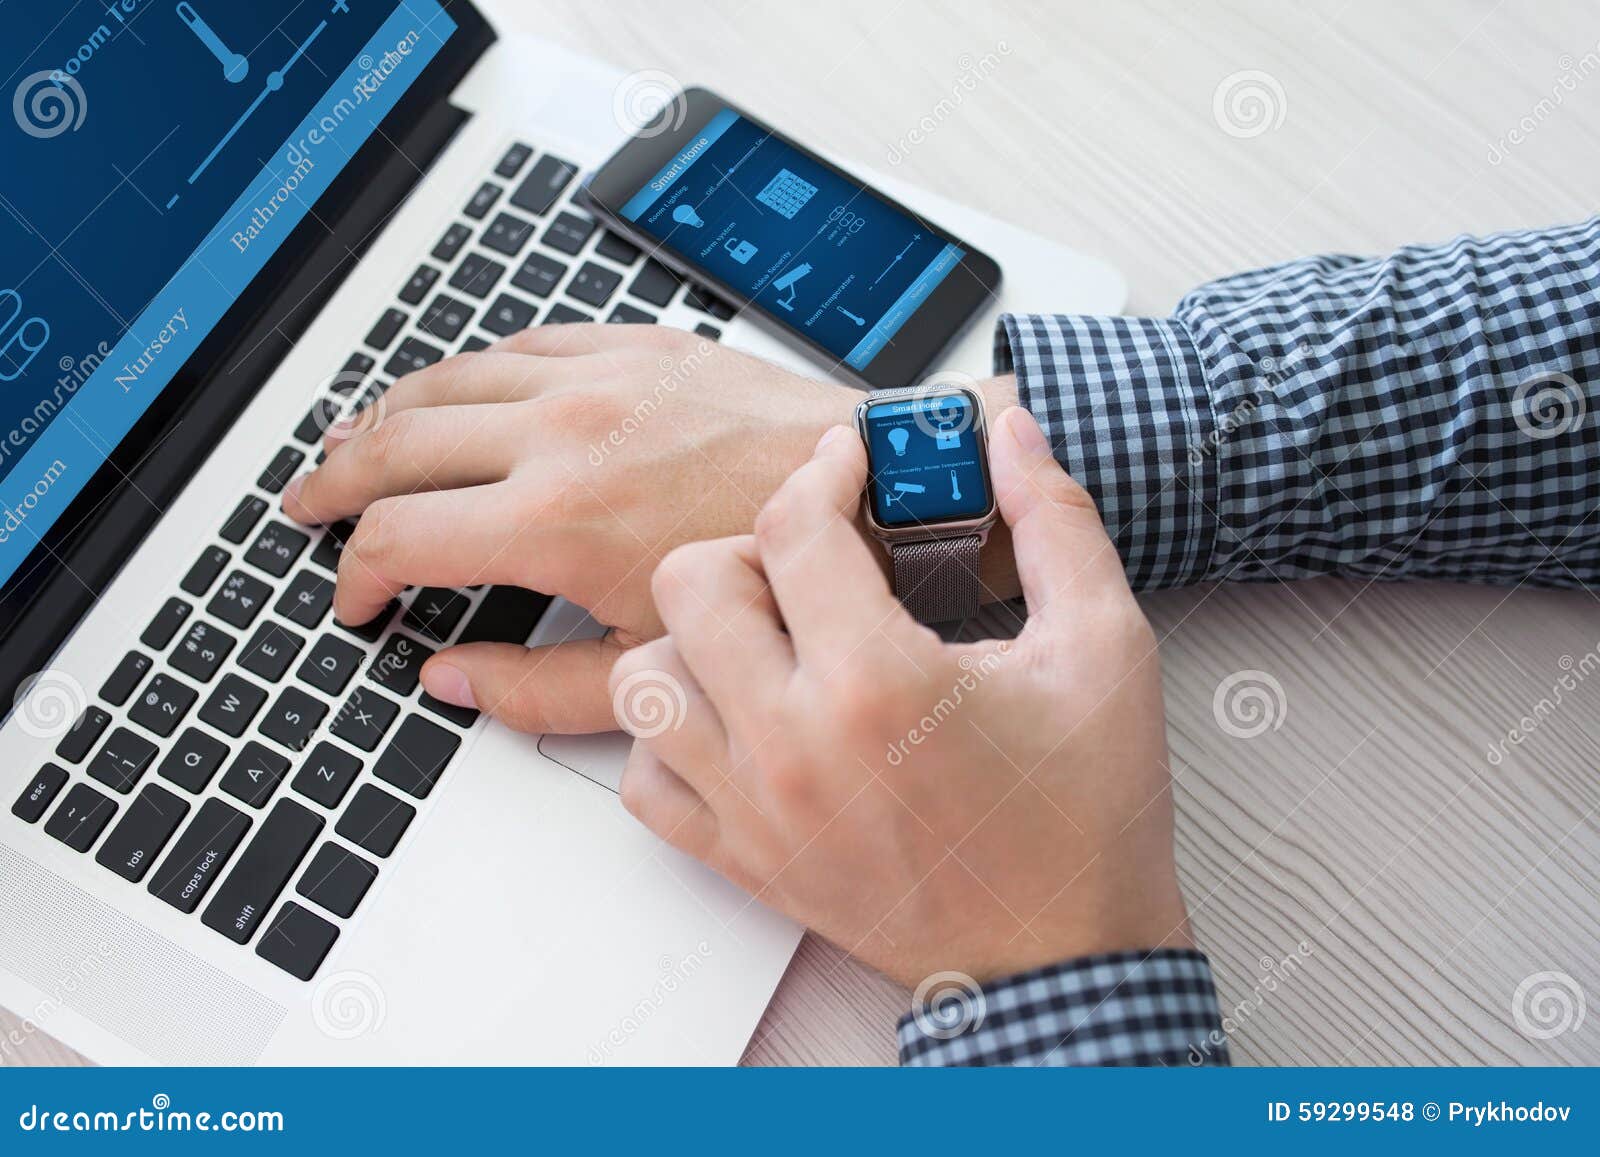 Man Hand In Watch With Smart Home Computer And Phone Stock Photo - Image: 59299548